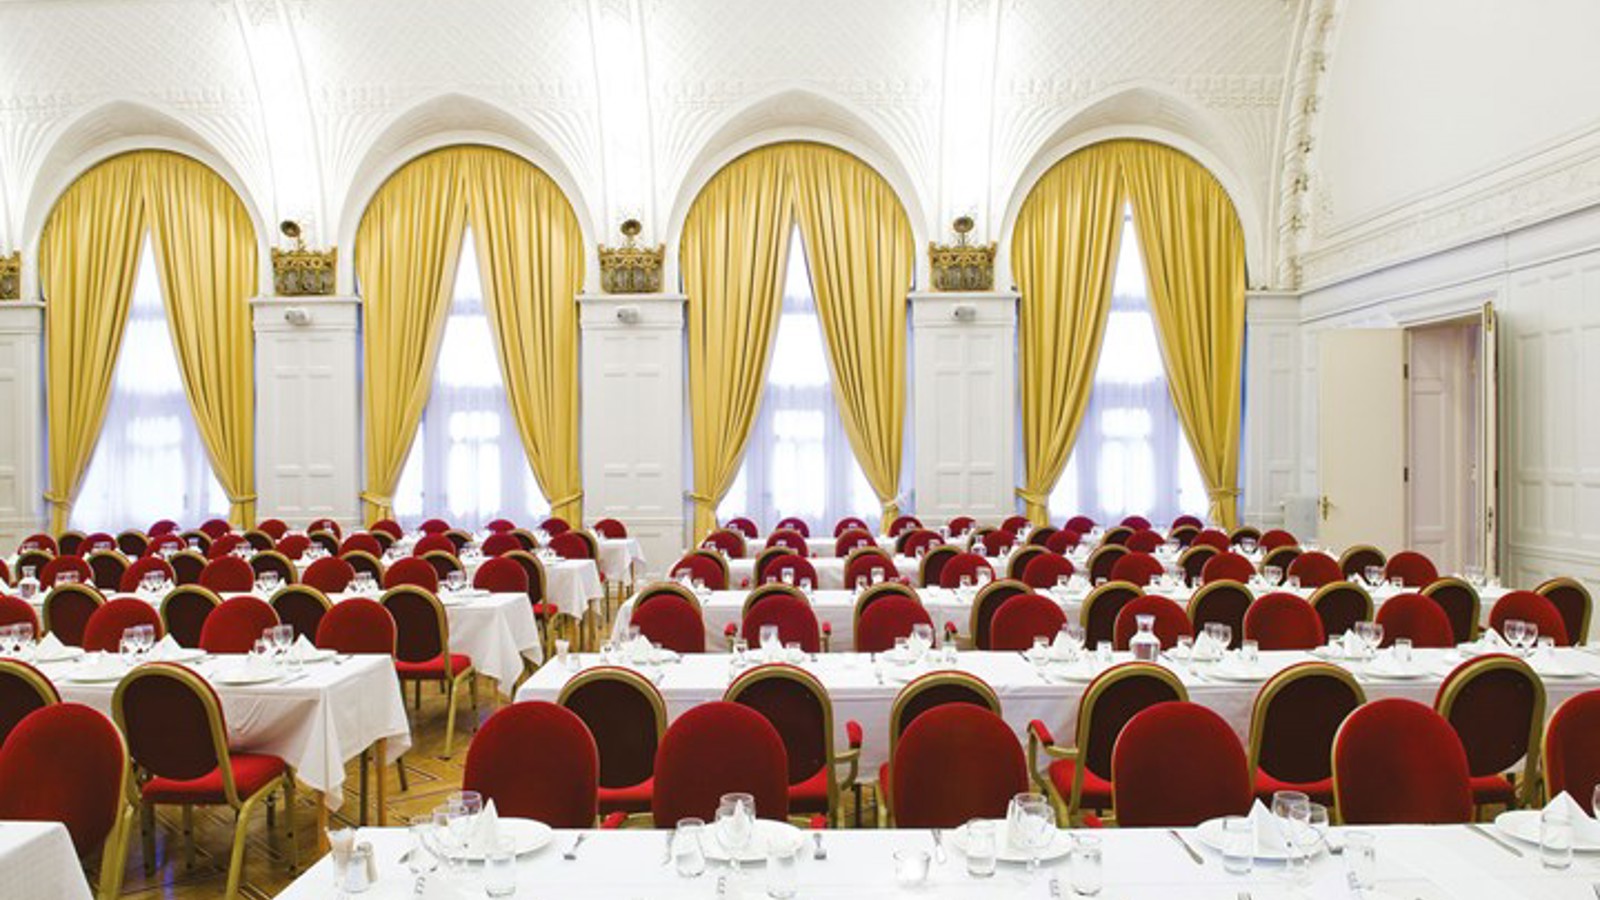 Large room with set tables, white tablecloths and red chairs